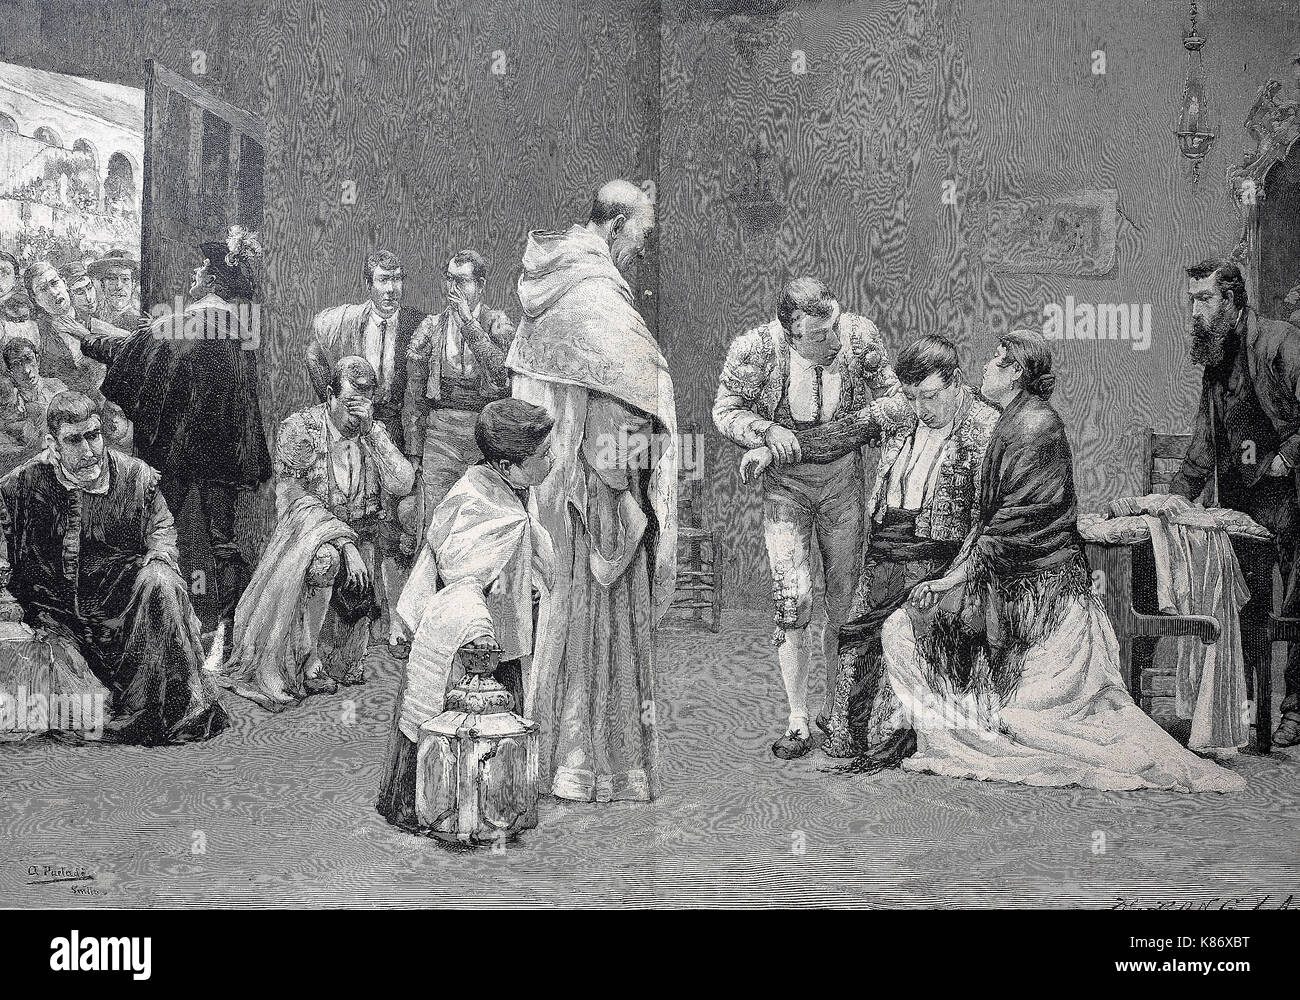 Bullfighting in Spain, the end of the torero, the seriously injured torero gets the last blessing, Digital improved reproduction of an original woodprint from the 19th century Stock Photo